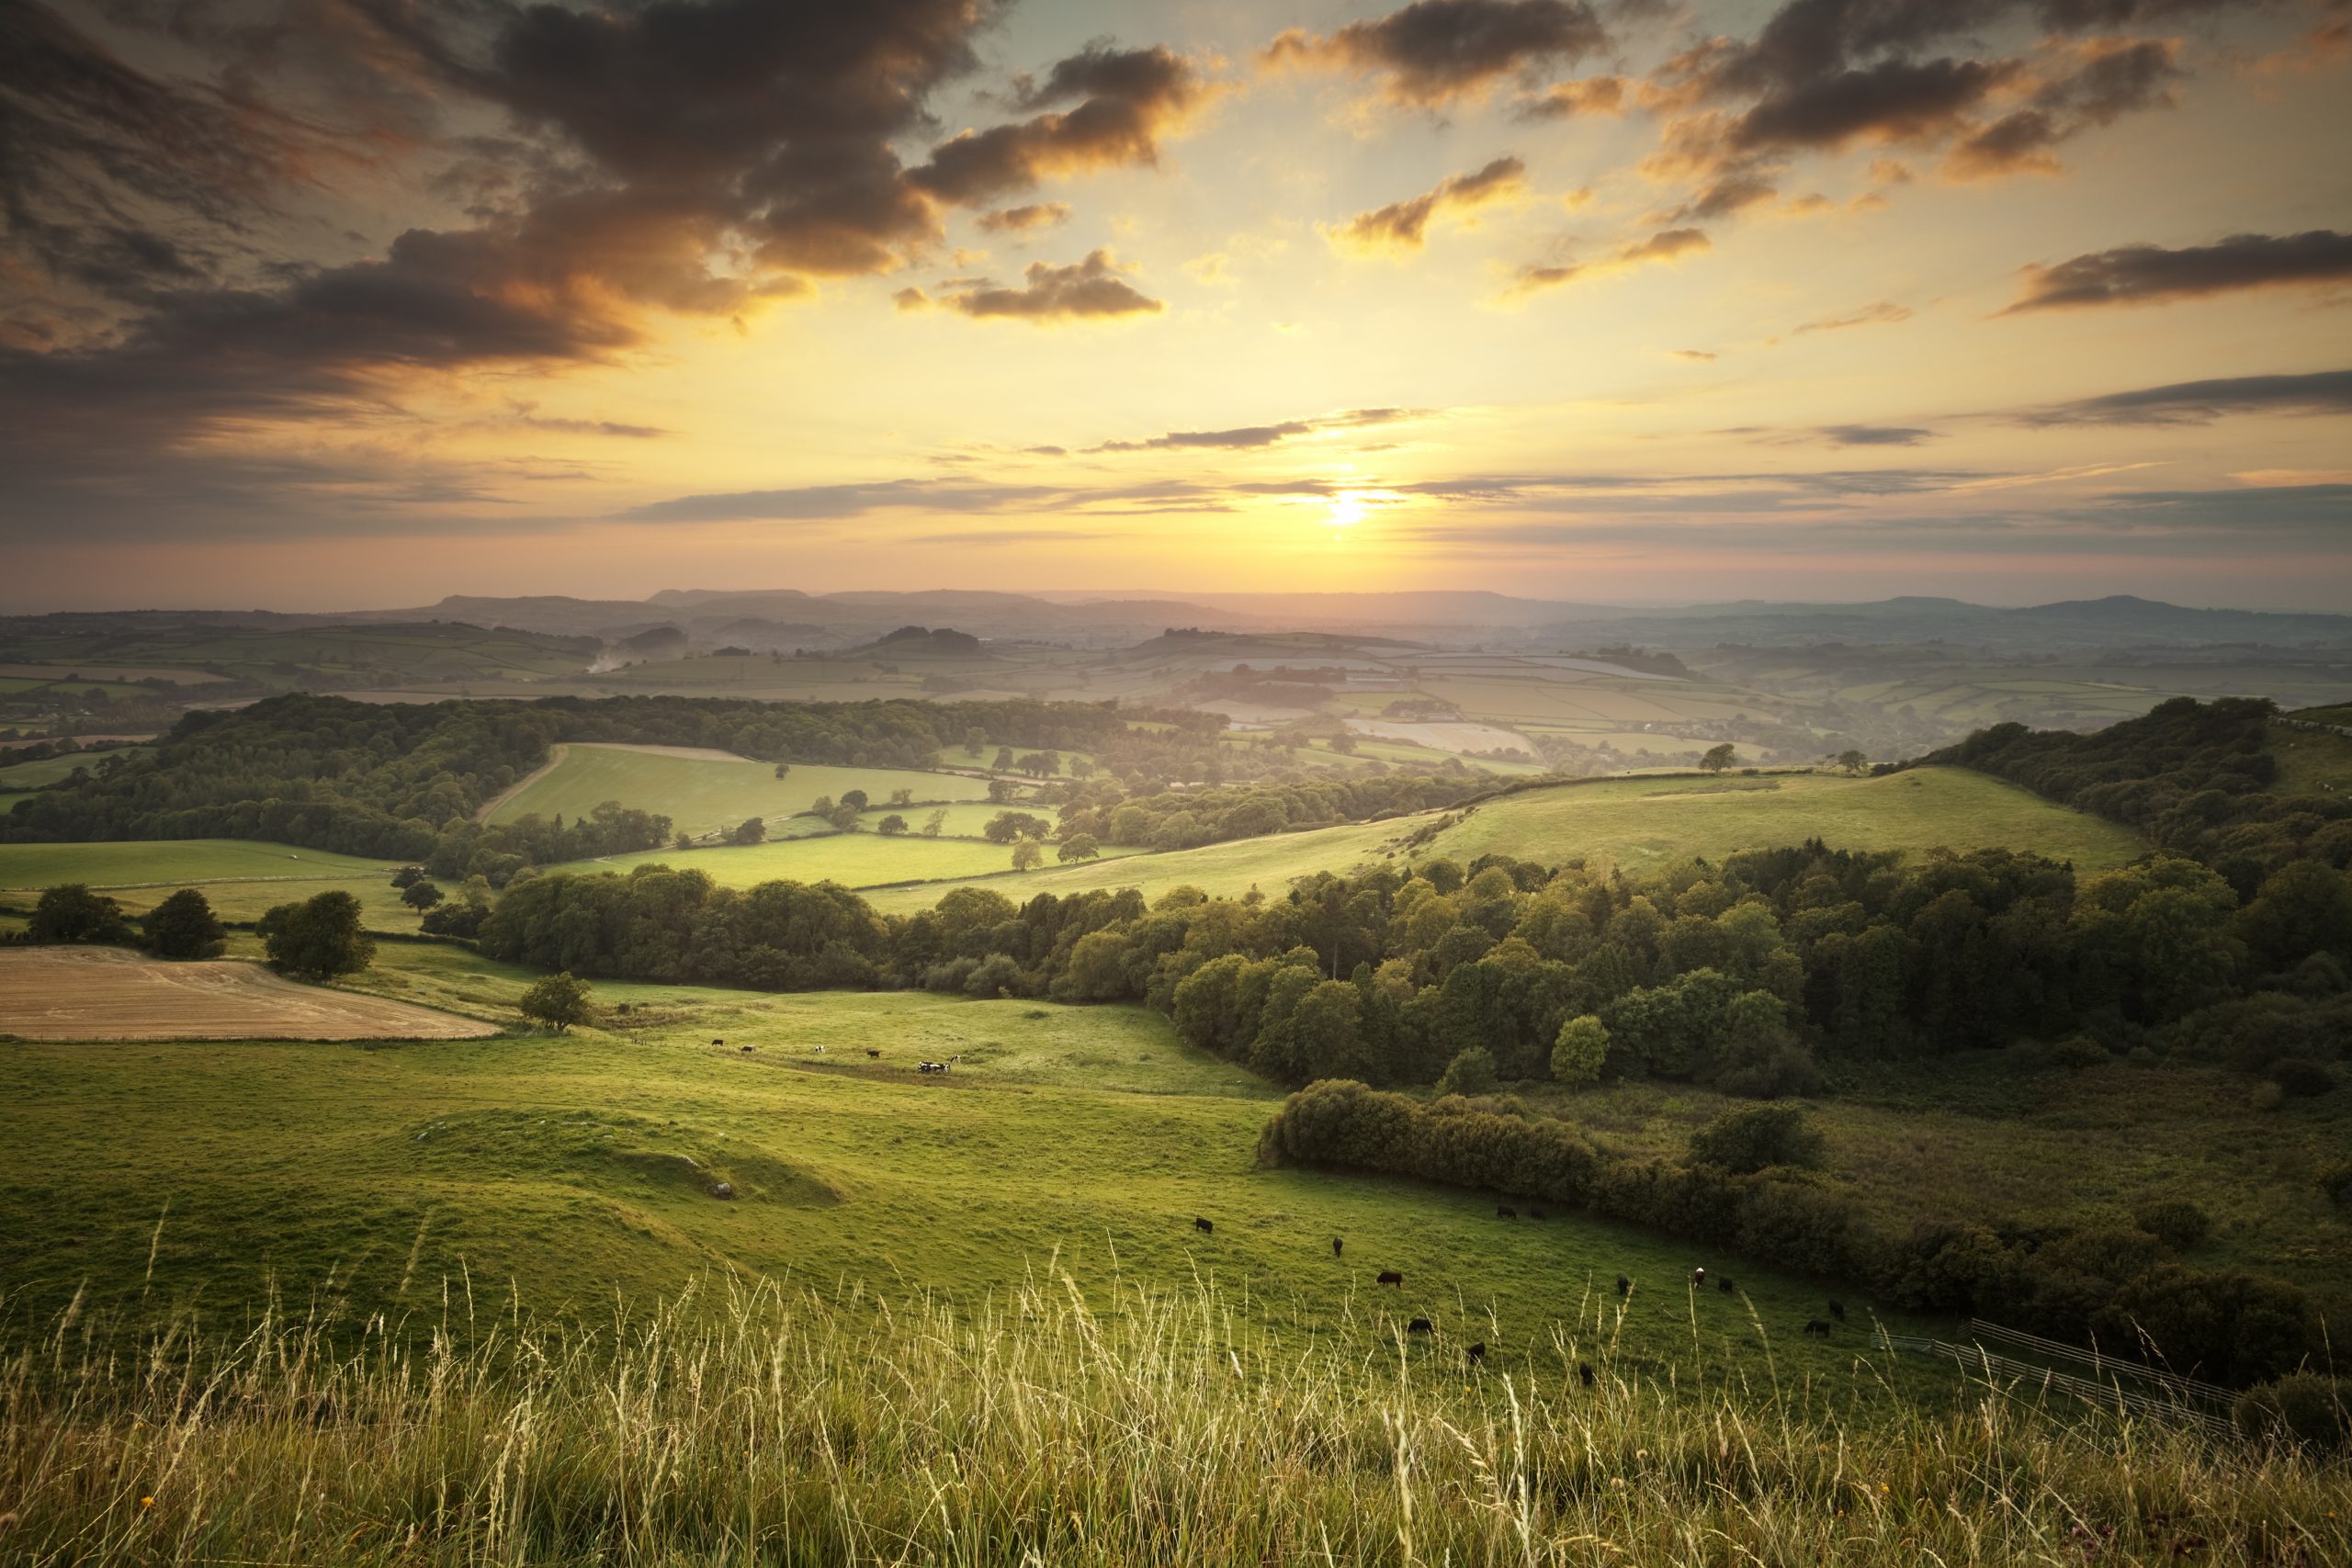 This is the view west from Eggardon Hill in Dorset, at sunset